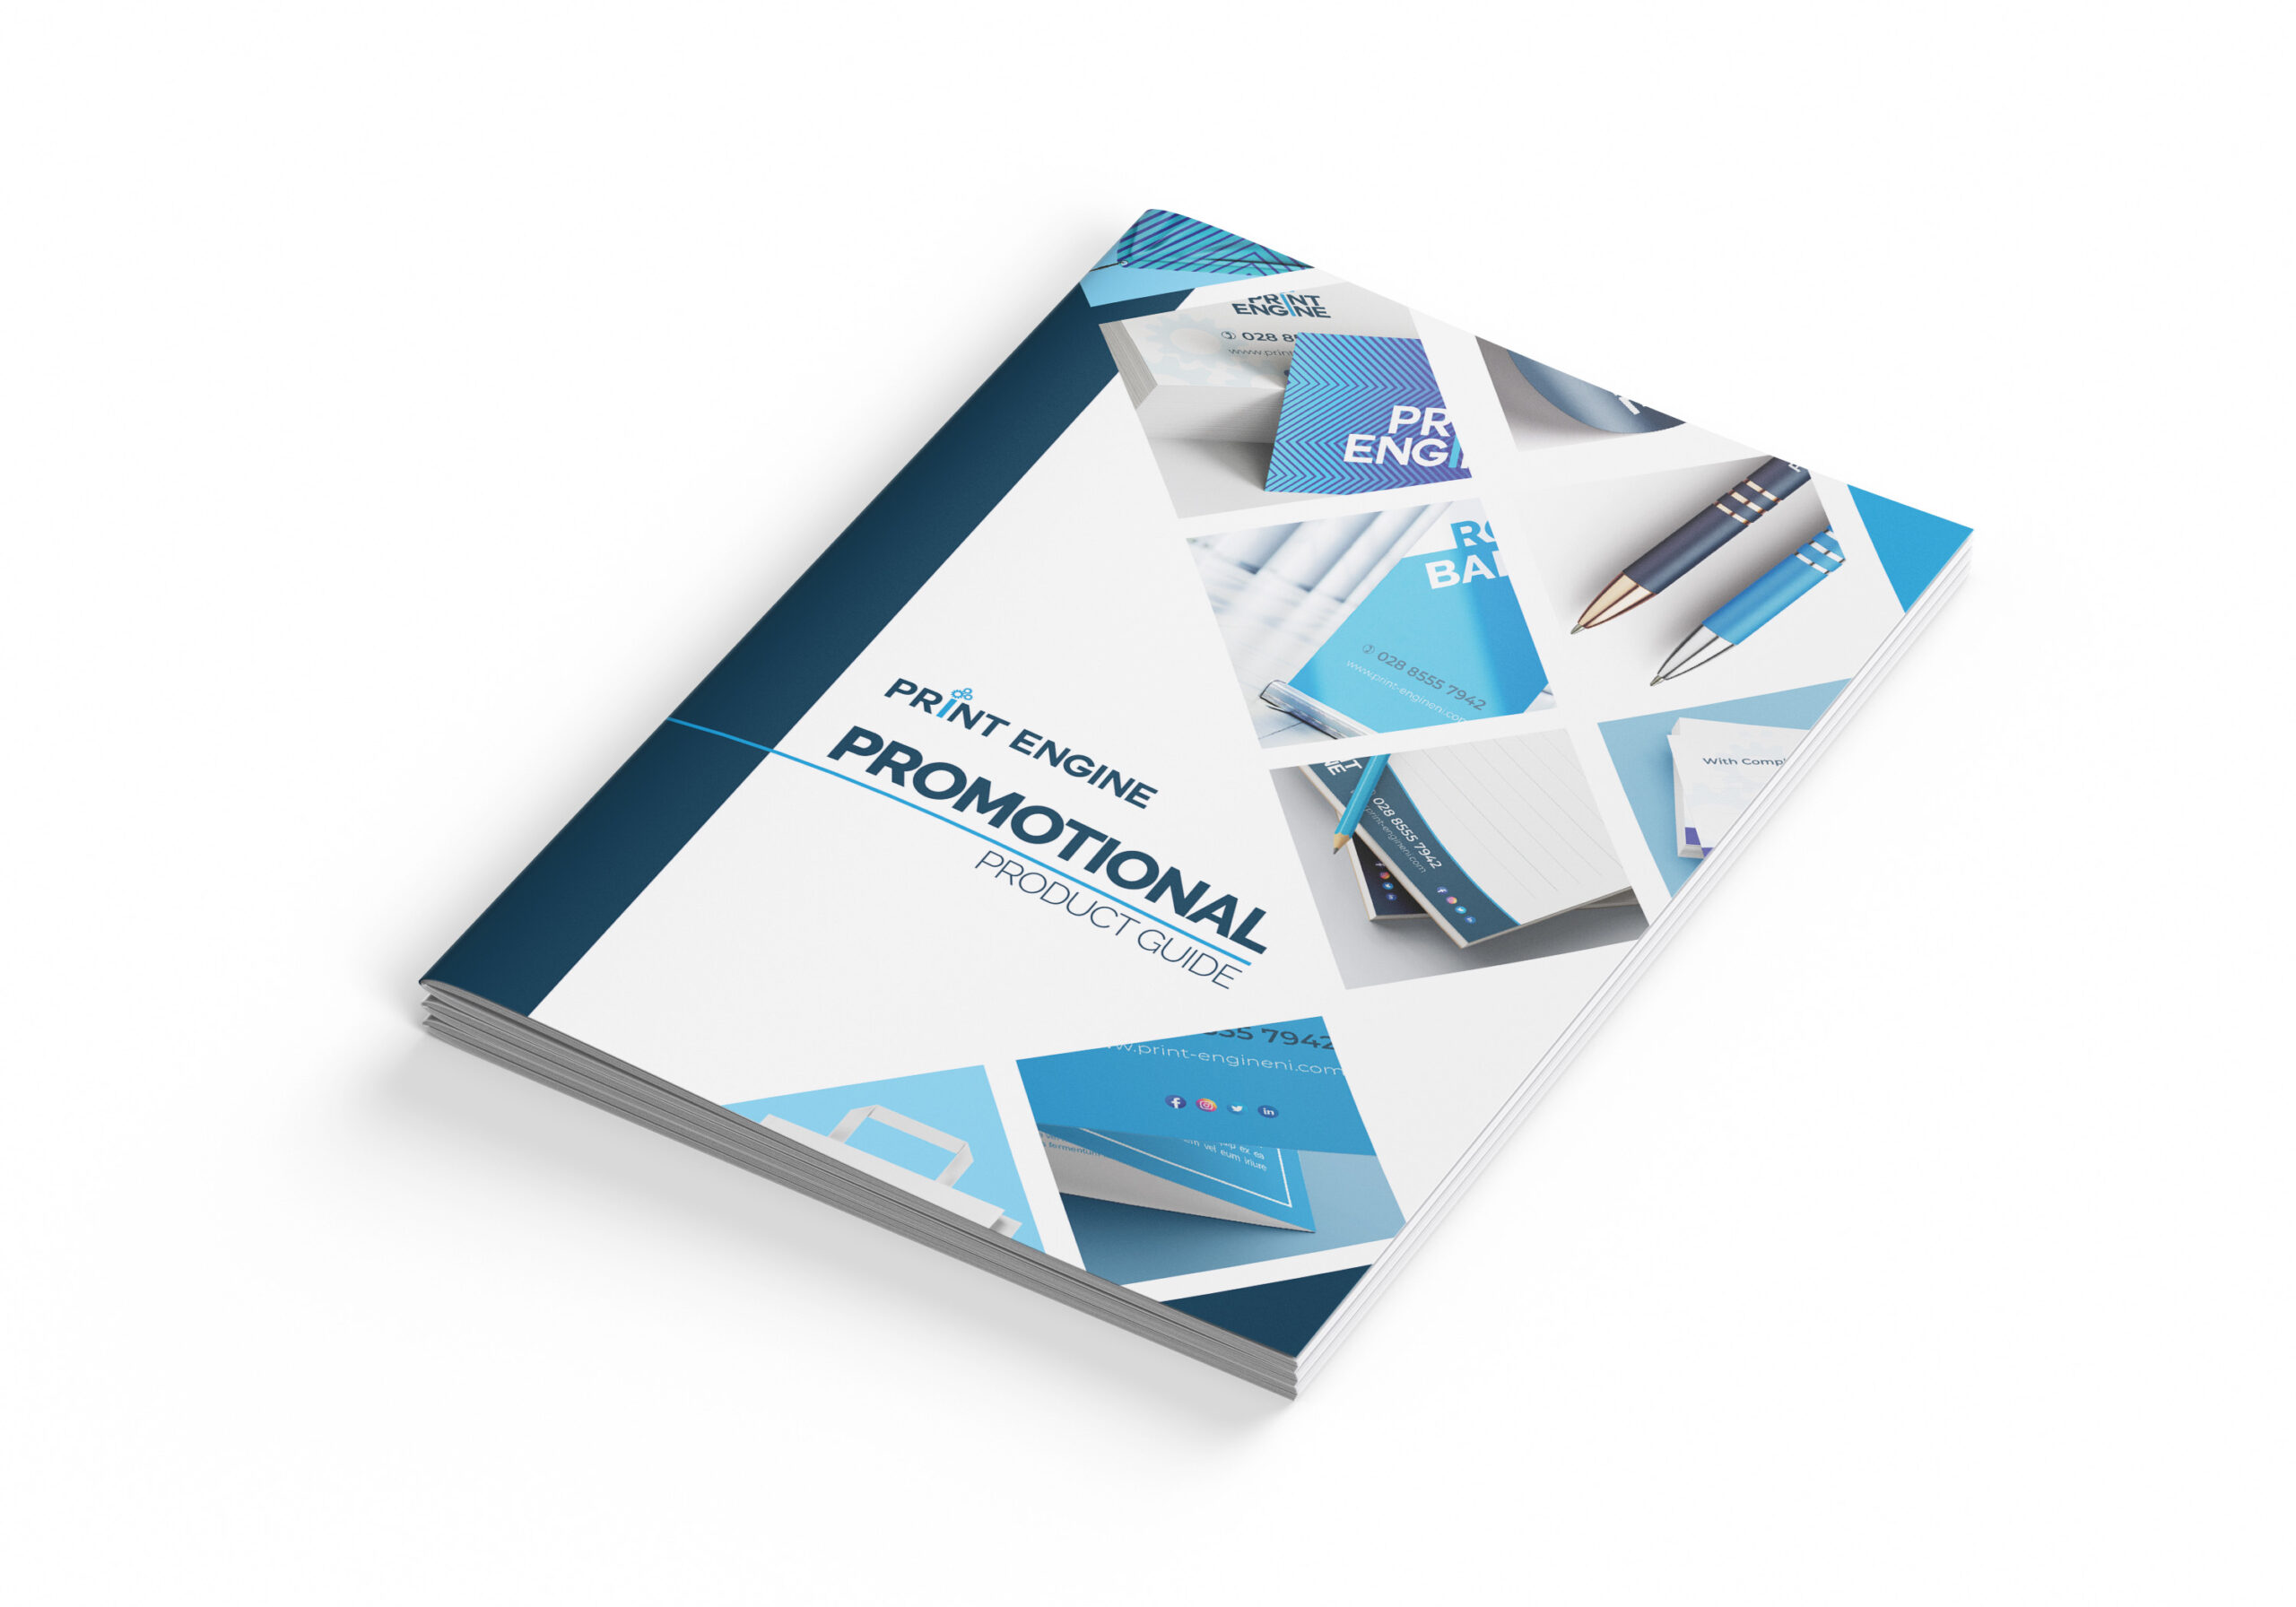 Promotional Product Guide Cover Mockup